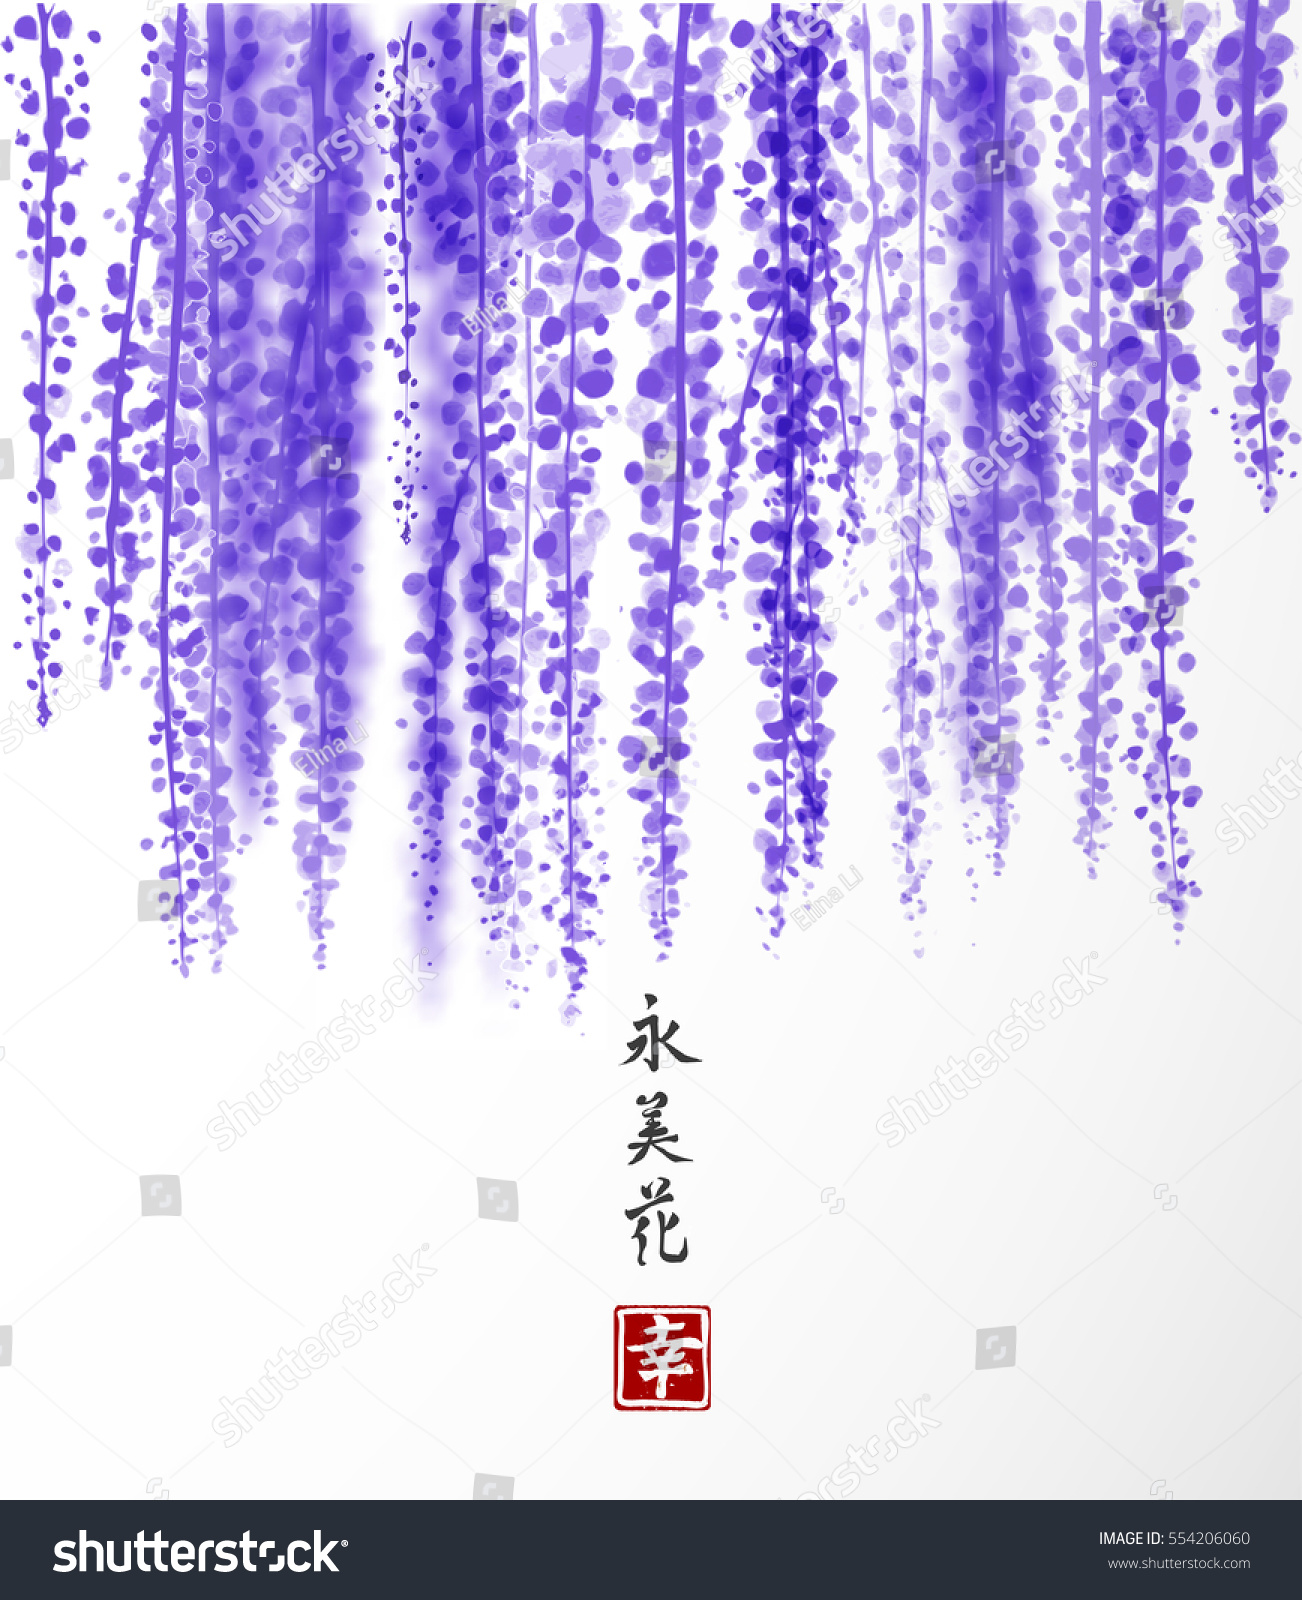 SVG of Wisteria hand drawn with ink on white background. Contains hieroglyph - happiness, eternity, beauty, flower. Traditional oriental ink painting sumi-e, u-sin, go-hua. Bunches of flowers. svg